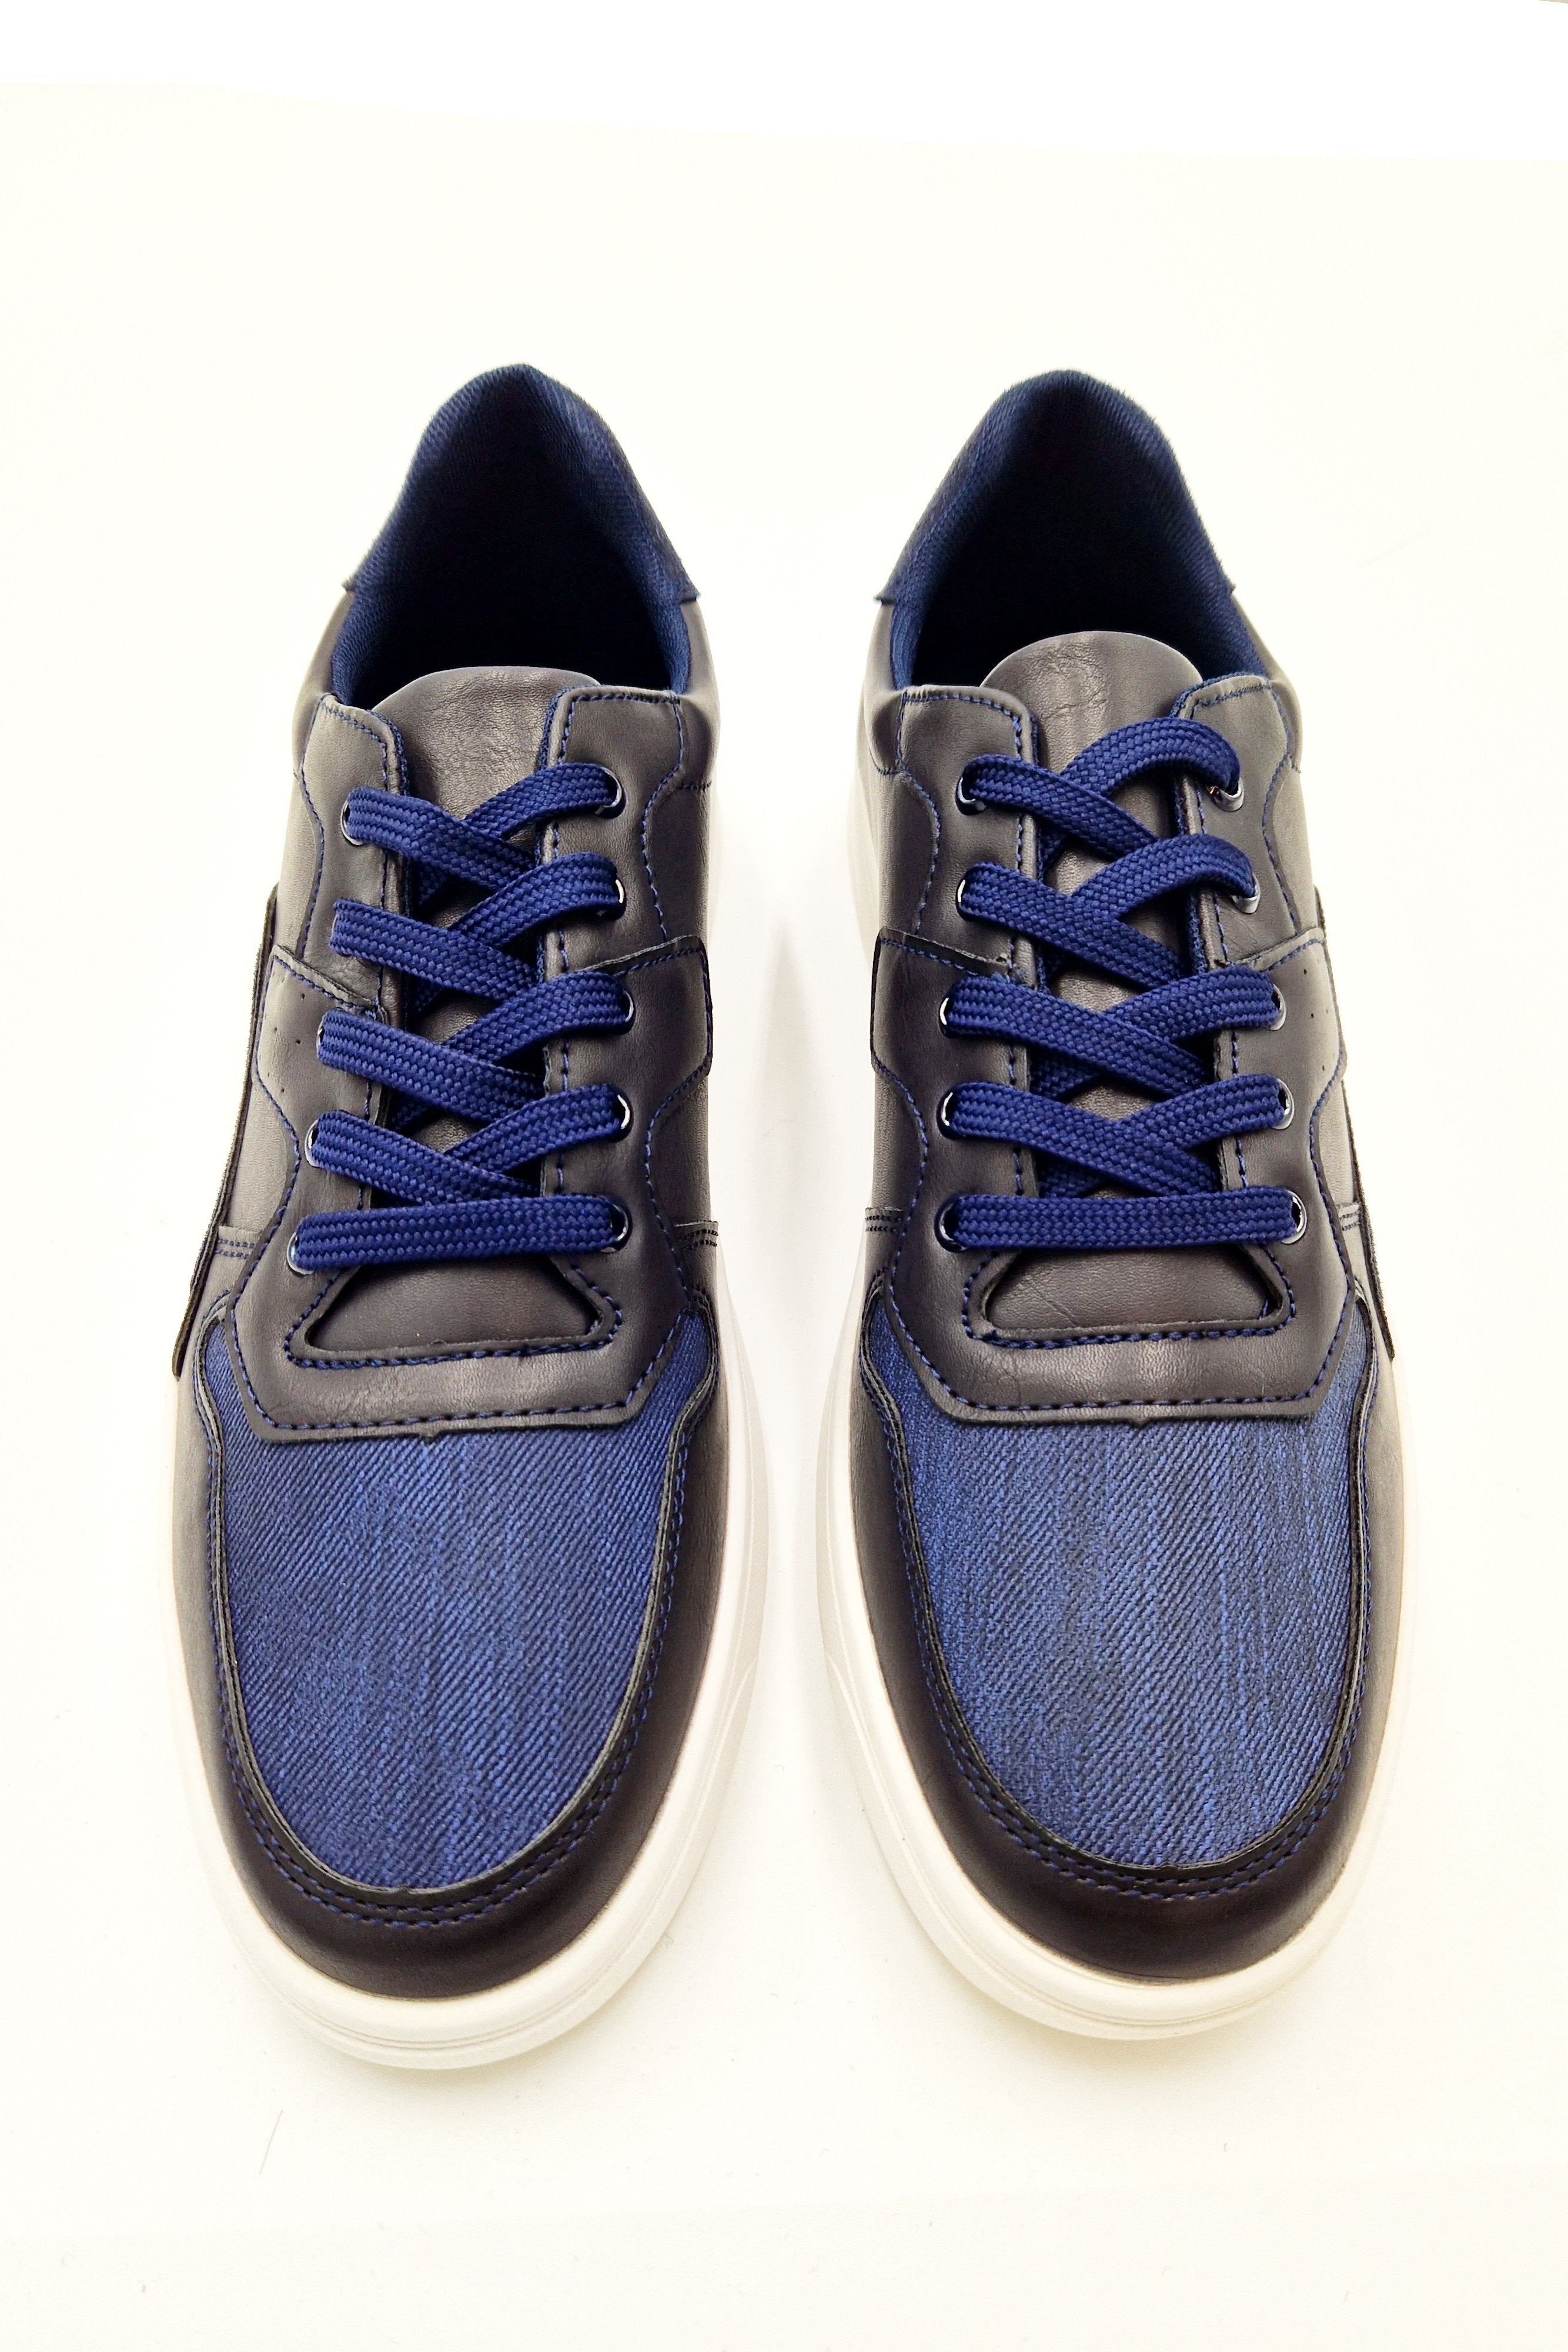 Mens Gorse Navy Shoe front